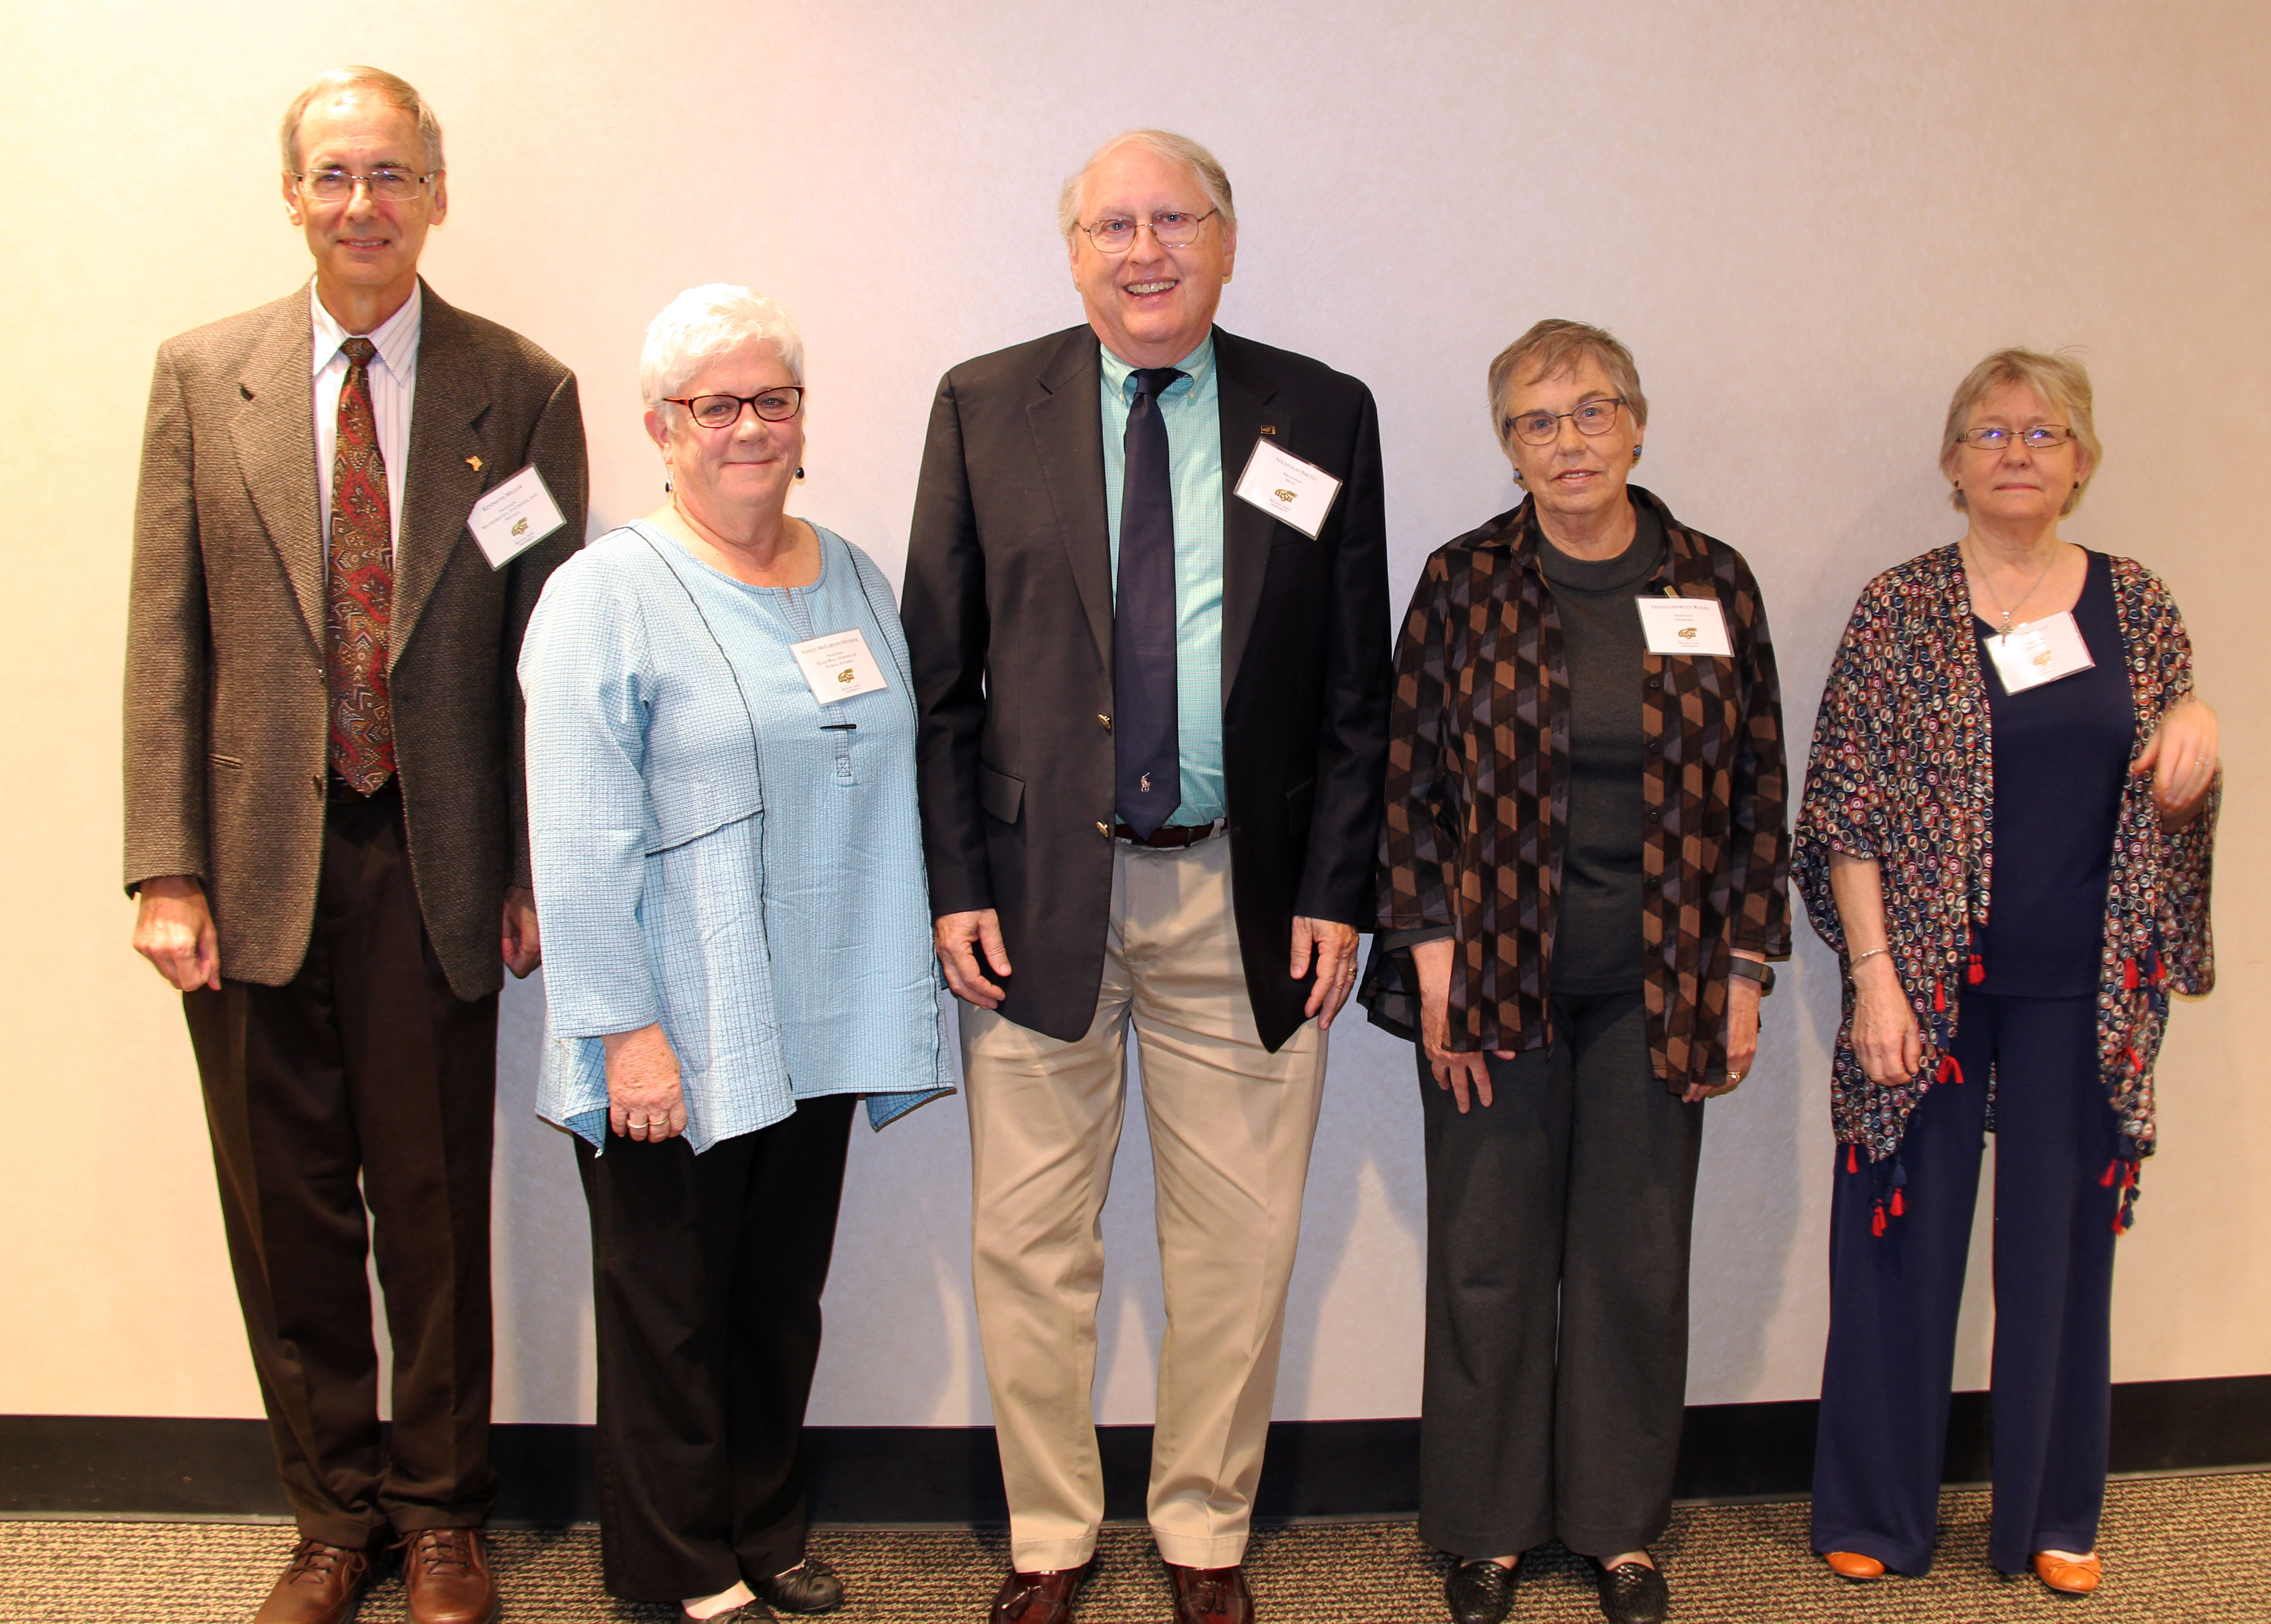 Photo of Inductees - Kenneth Miller, Nancy Snyder, Nicholas Smith, Donna Hawley Wolfe, Tina Bennett. Not shown: Barbara Hodson and Eunice Myers.